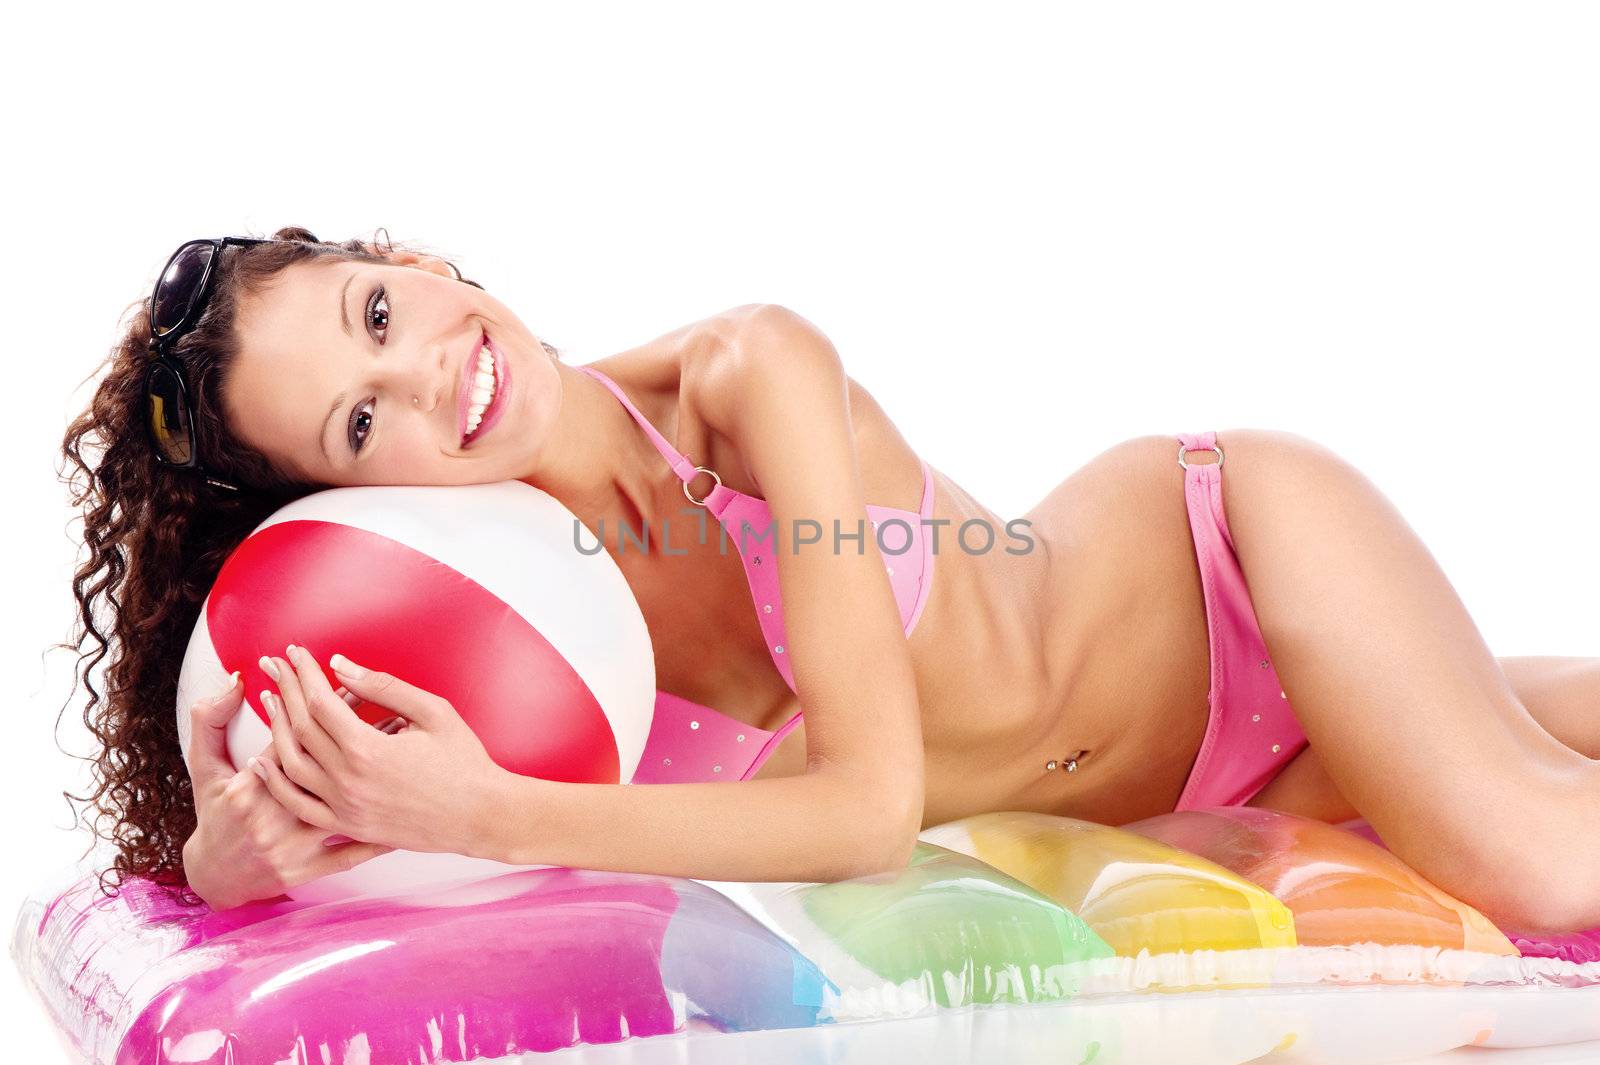 Smiled curl hair girl in bikini with ball laying on air mattress on white background